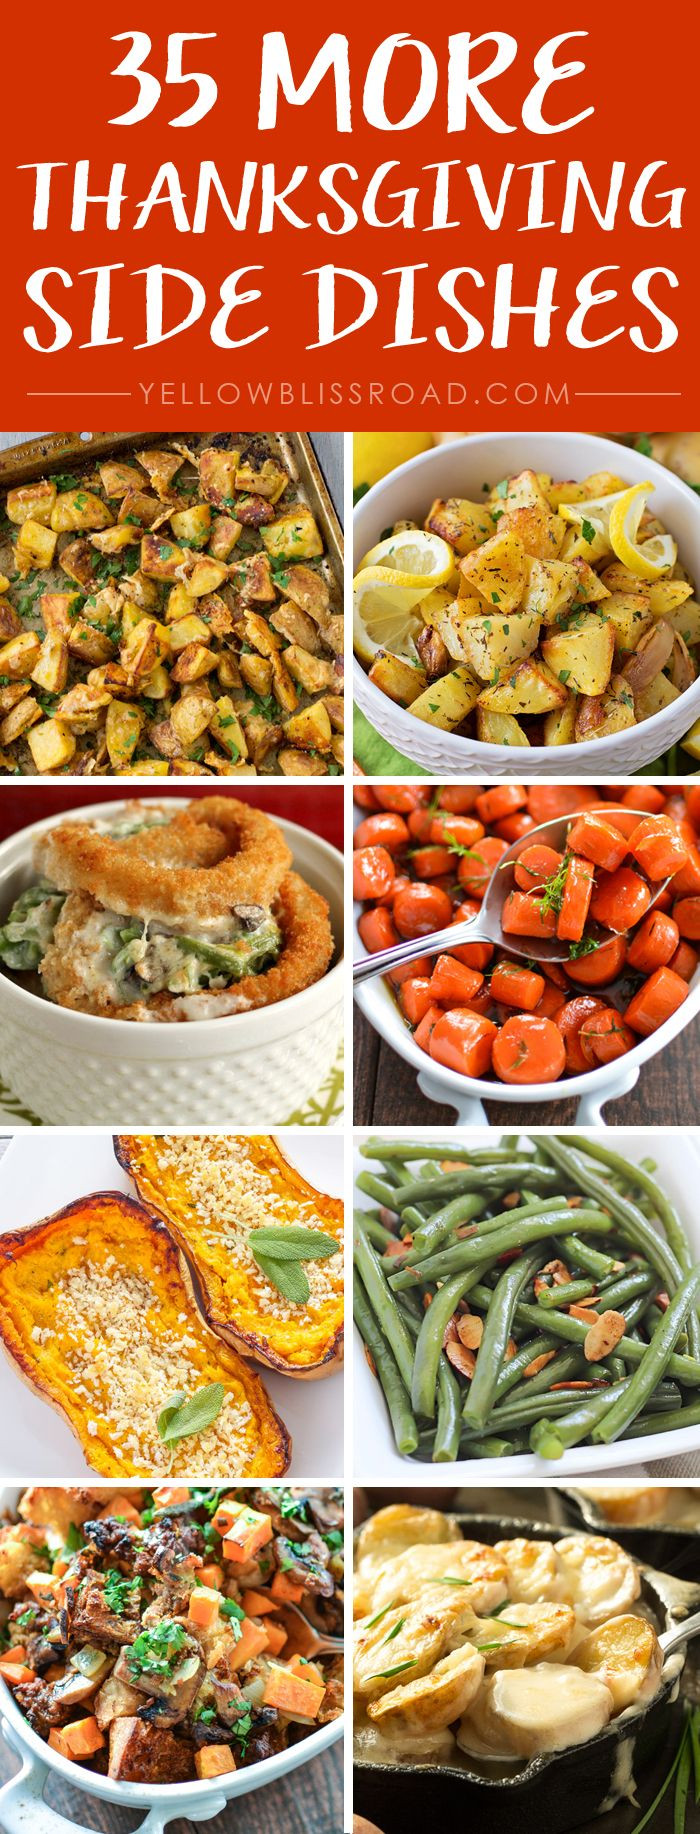 Thanksgiving Side Dishes Pinterest
 Thanksgiving Side Dishes